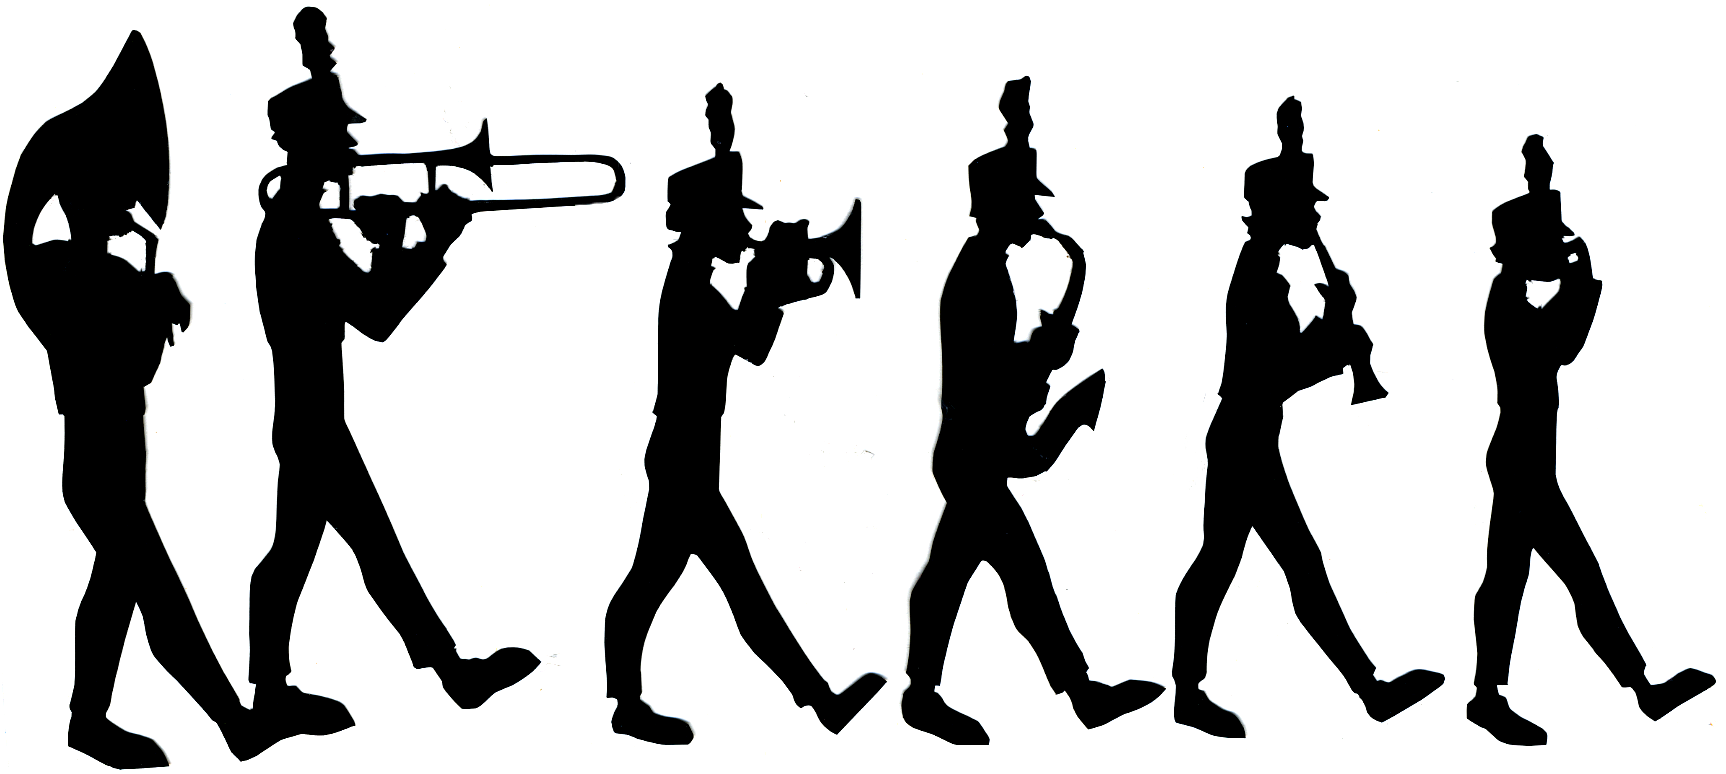 marching band hat clip art - photo #19